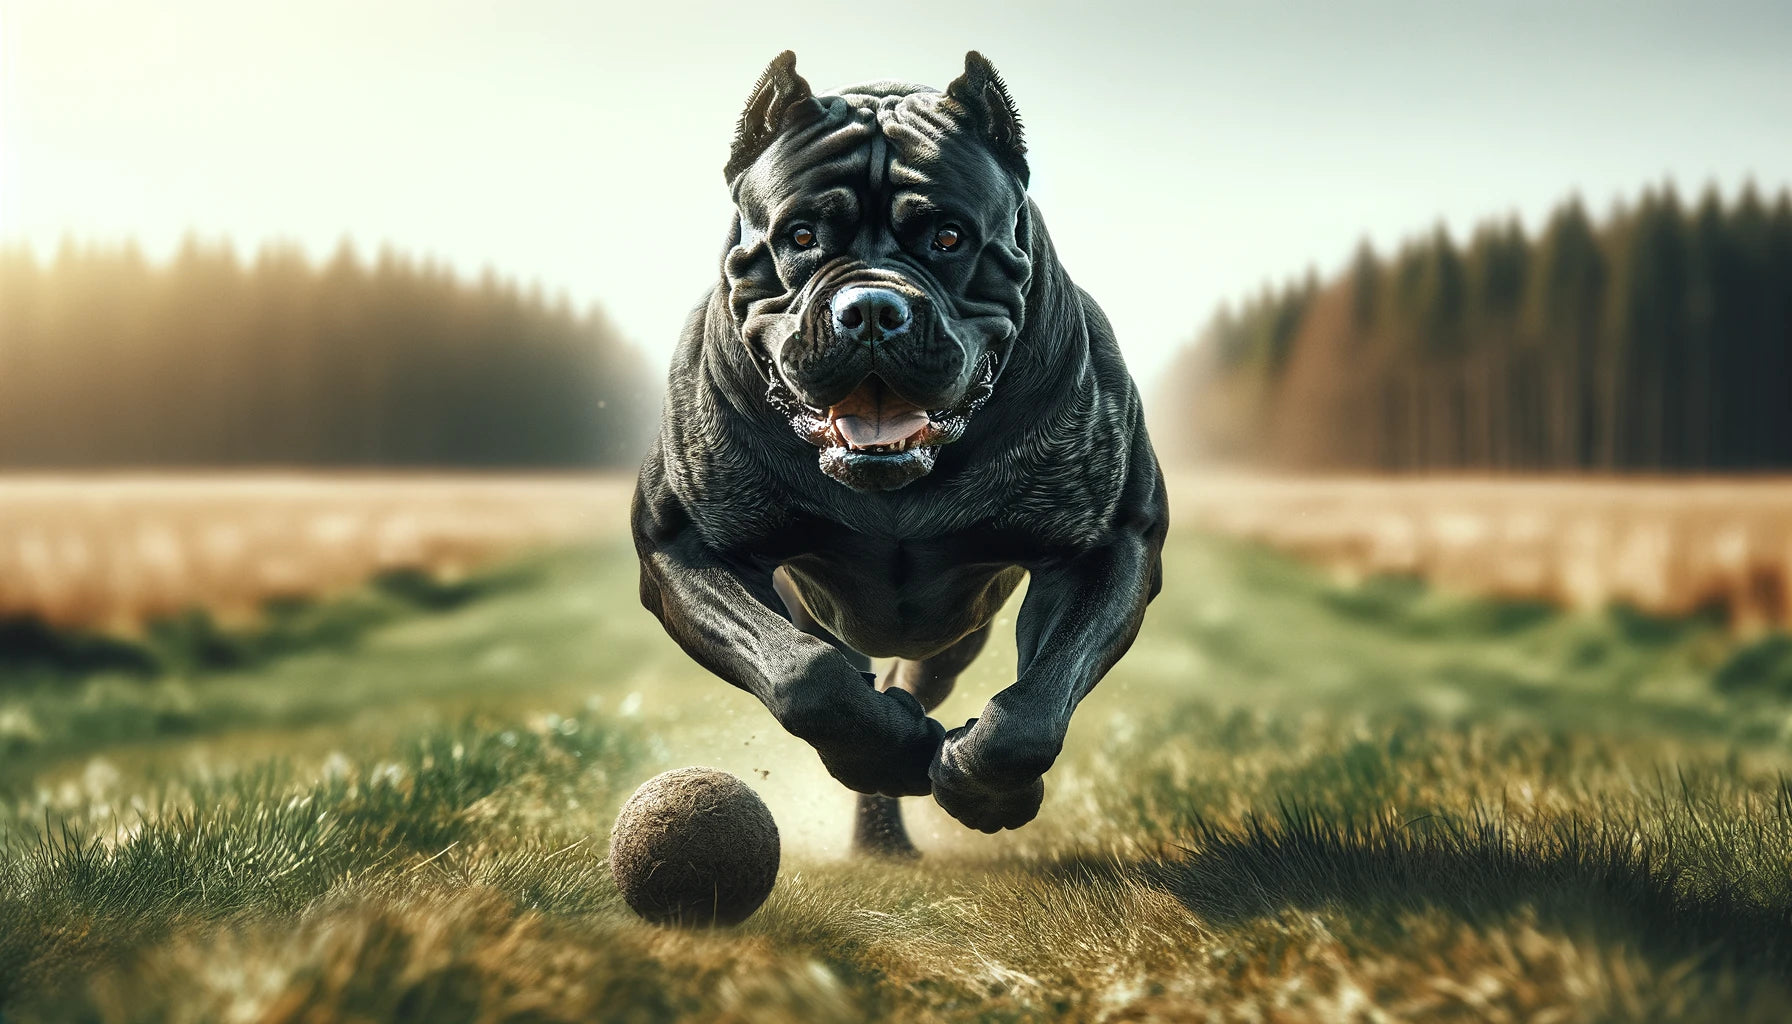 Cane Corso sprinting across a grassy field in pursuit of a ball.